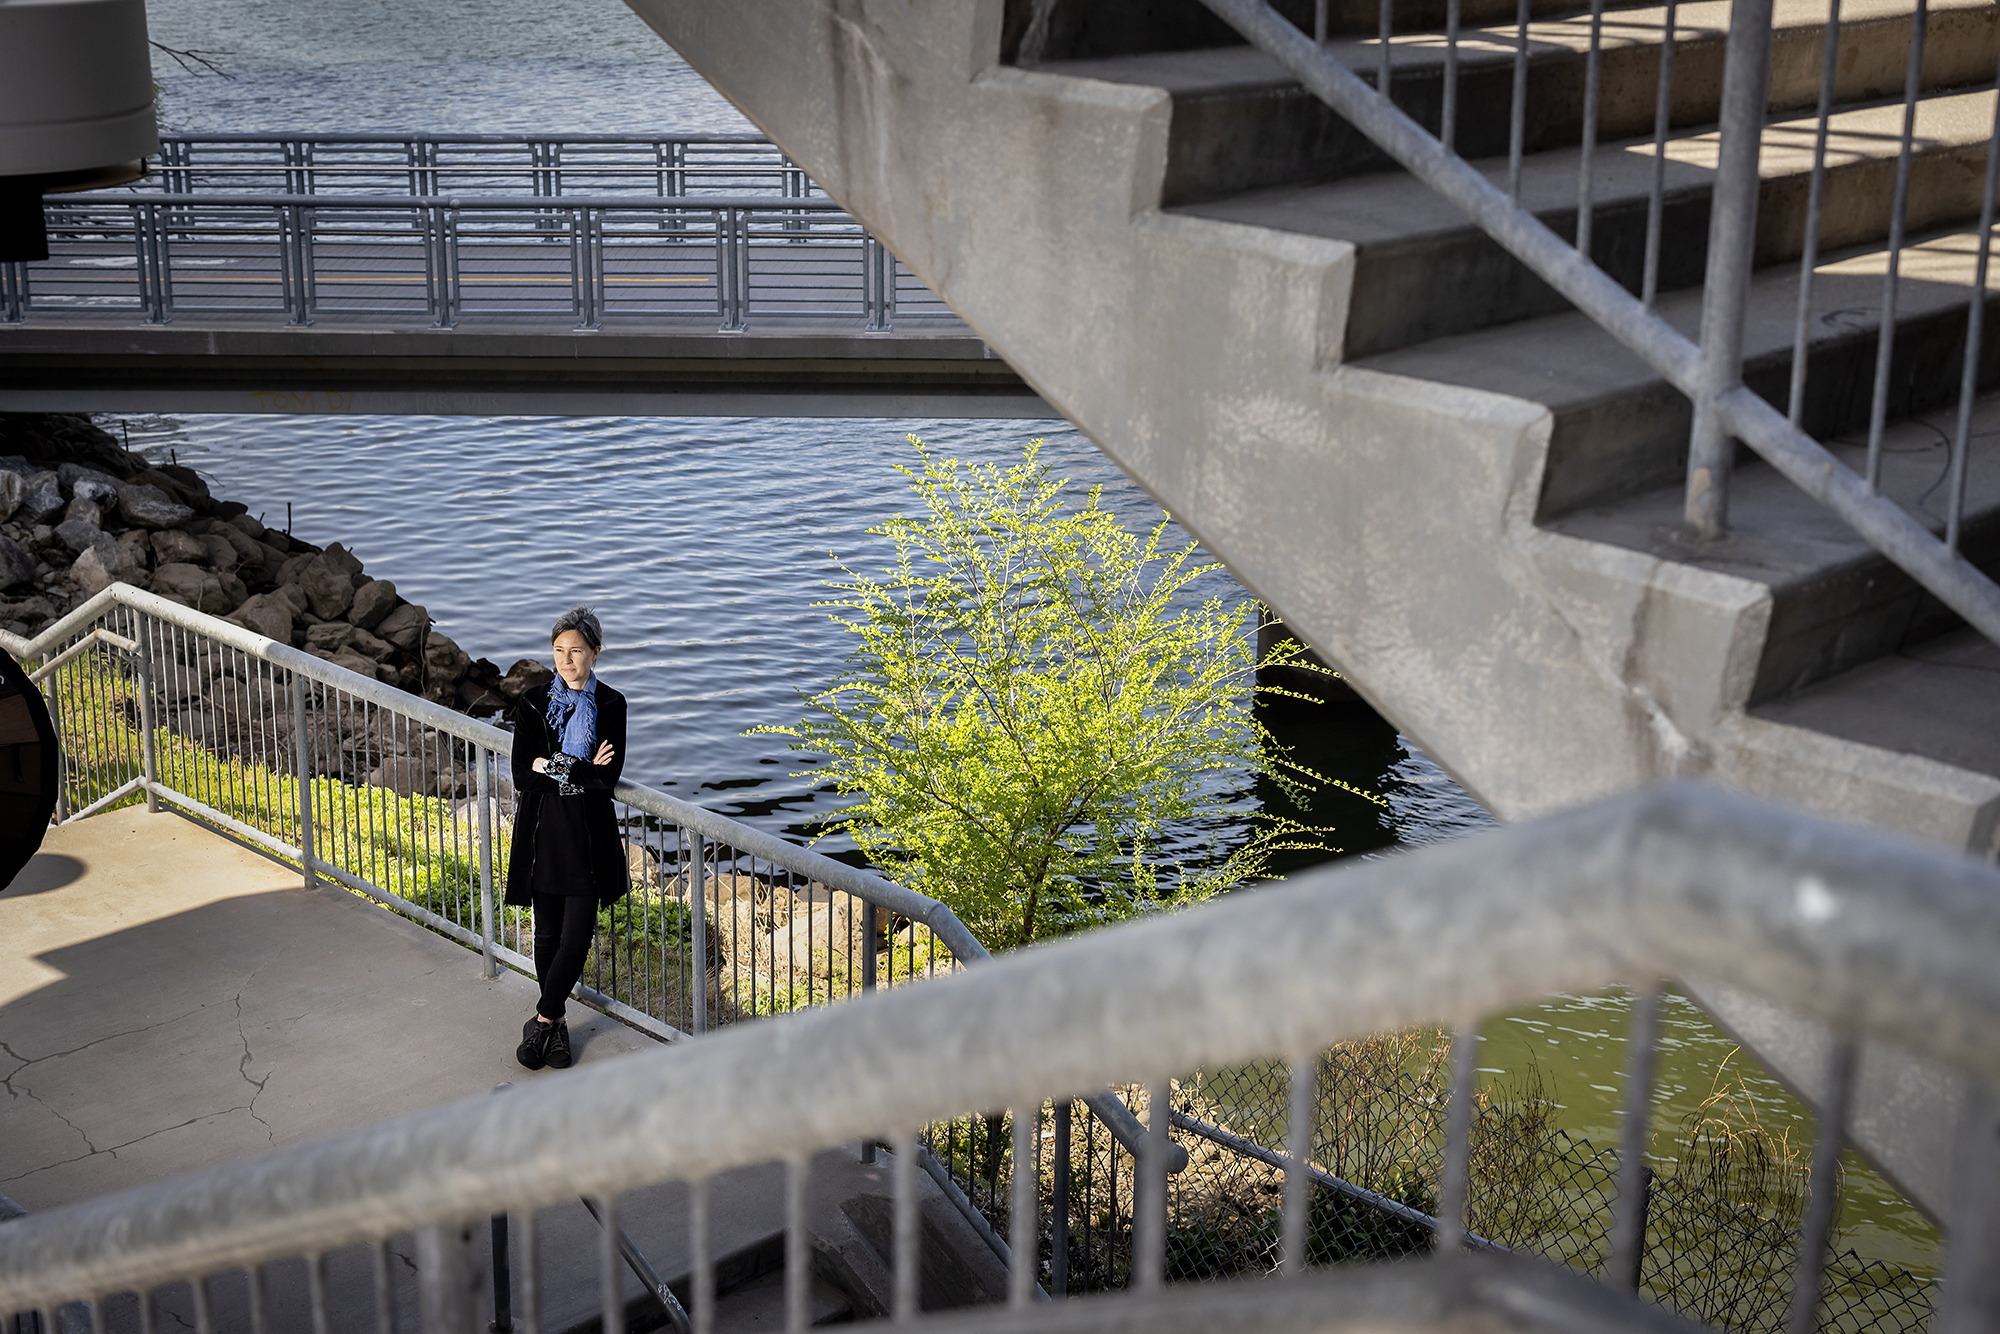 Sonja Dumpelmann on the staircase leading down to the Schuylkill River Trail